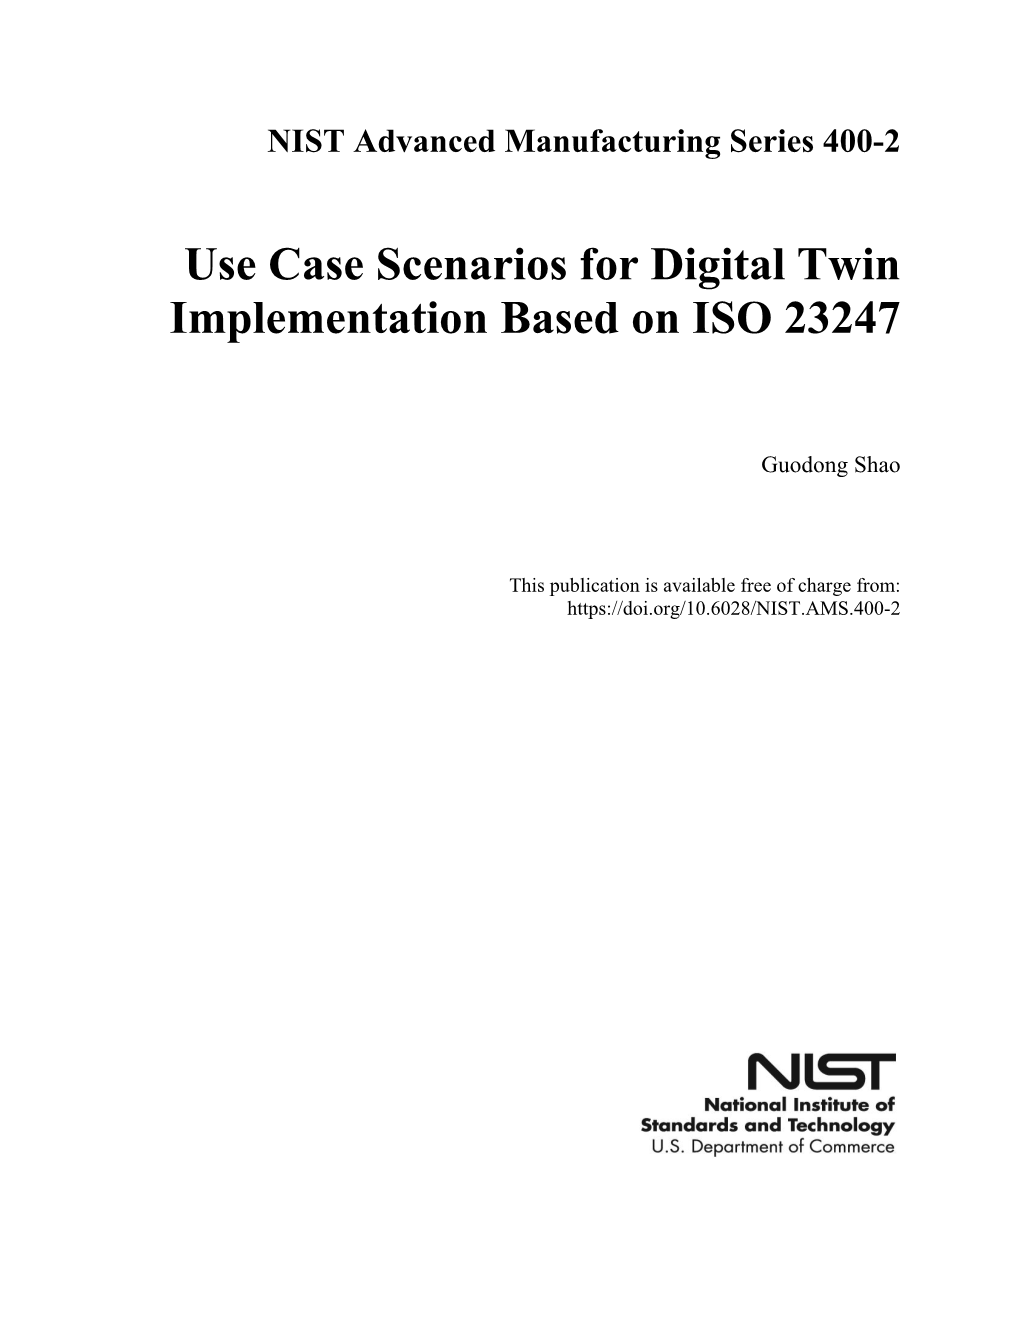 Use Case Scenarios for Digital Twin Implementation Based on ISO 23247